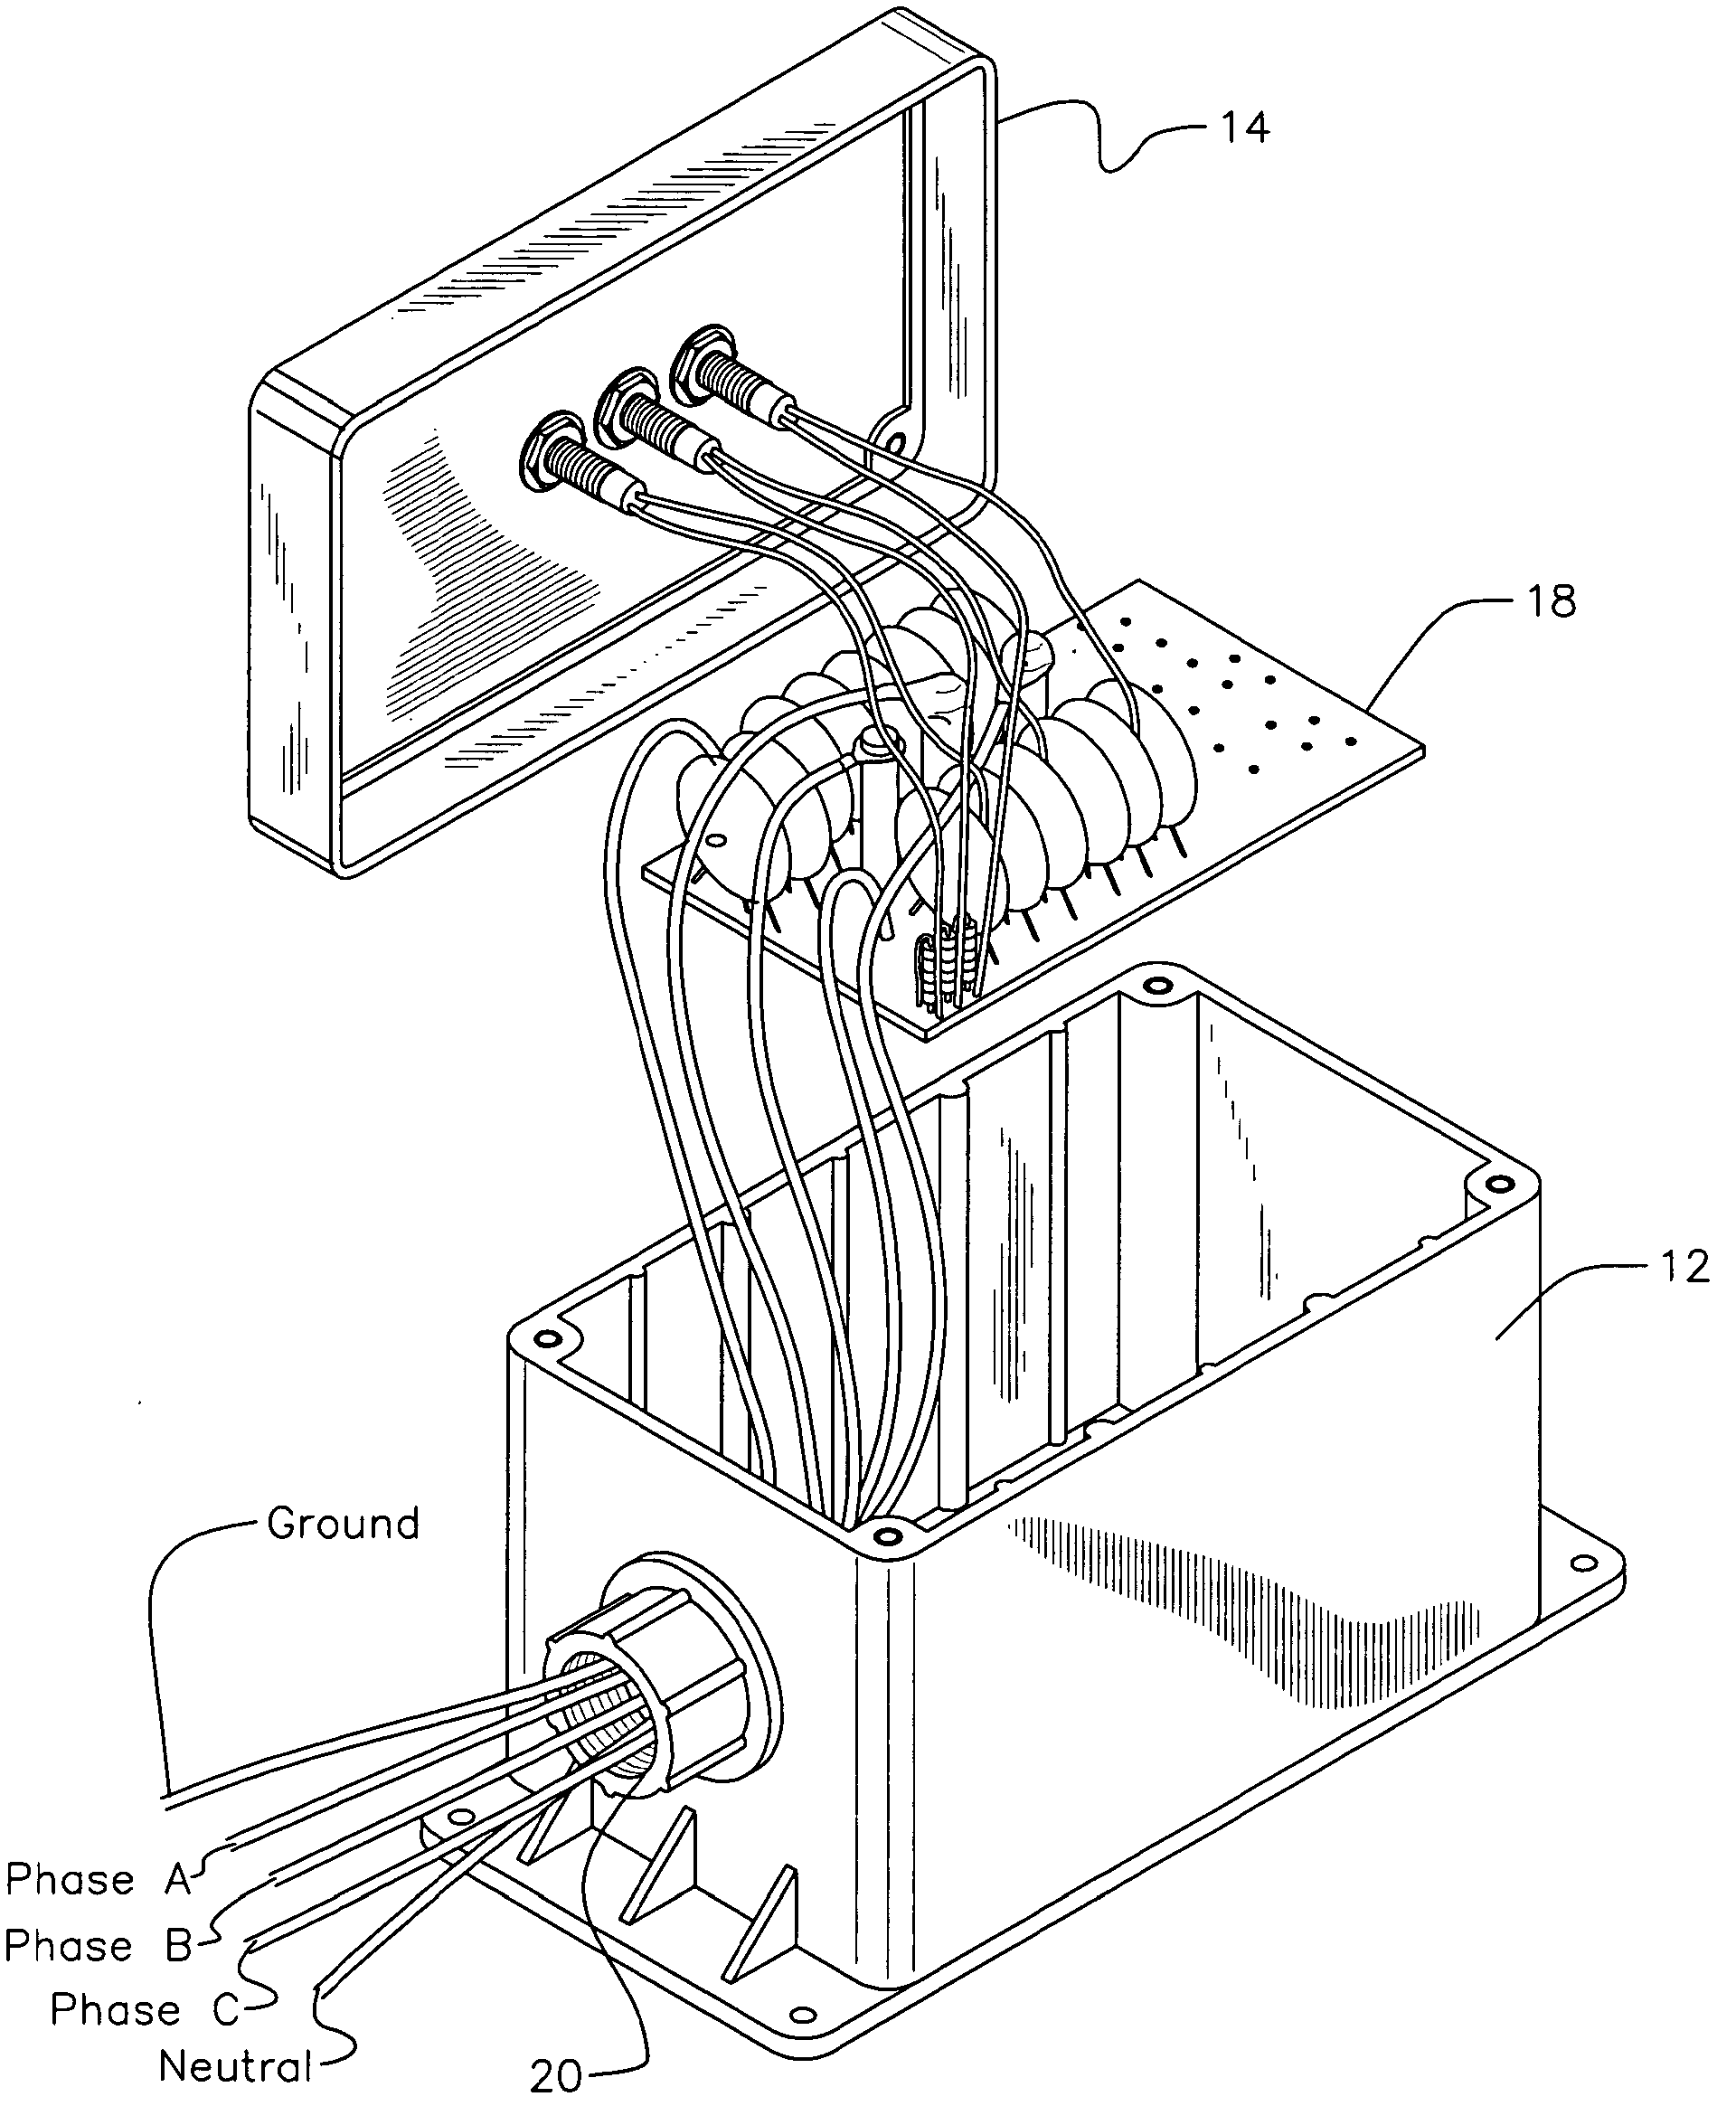 Potted electrical circuit with protective insulation